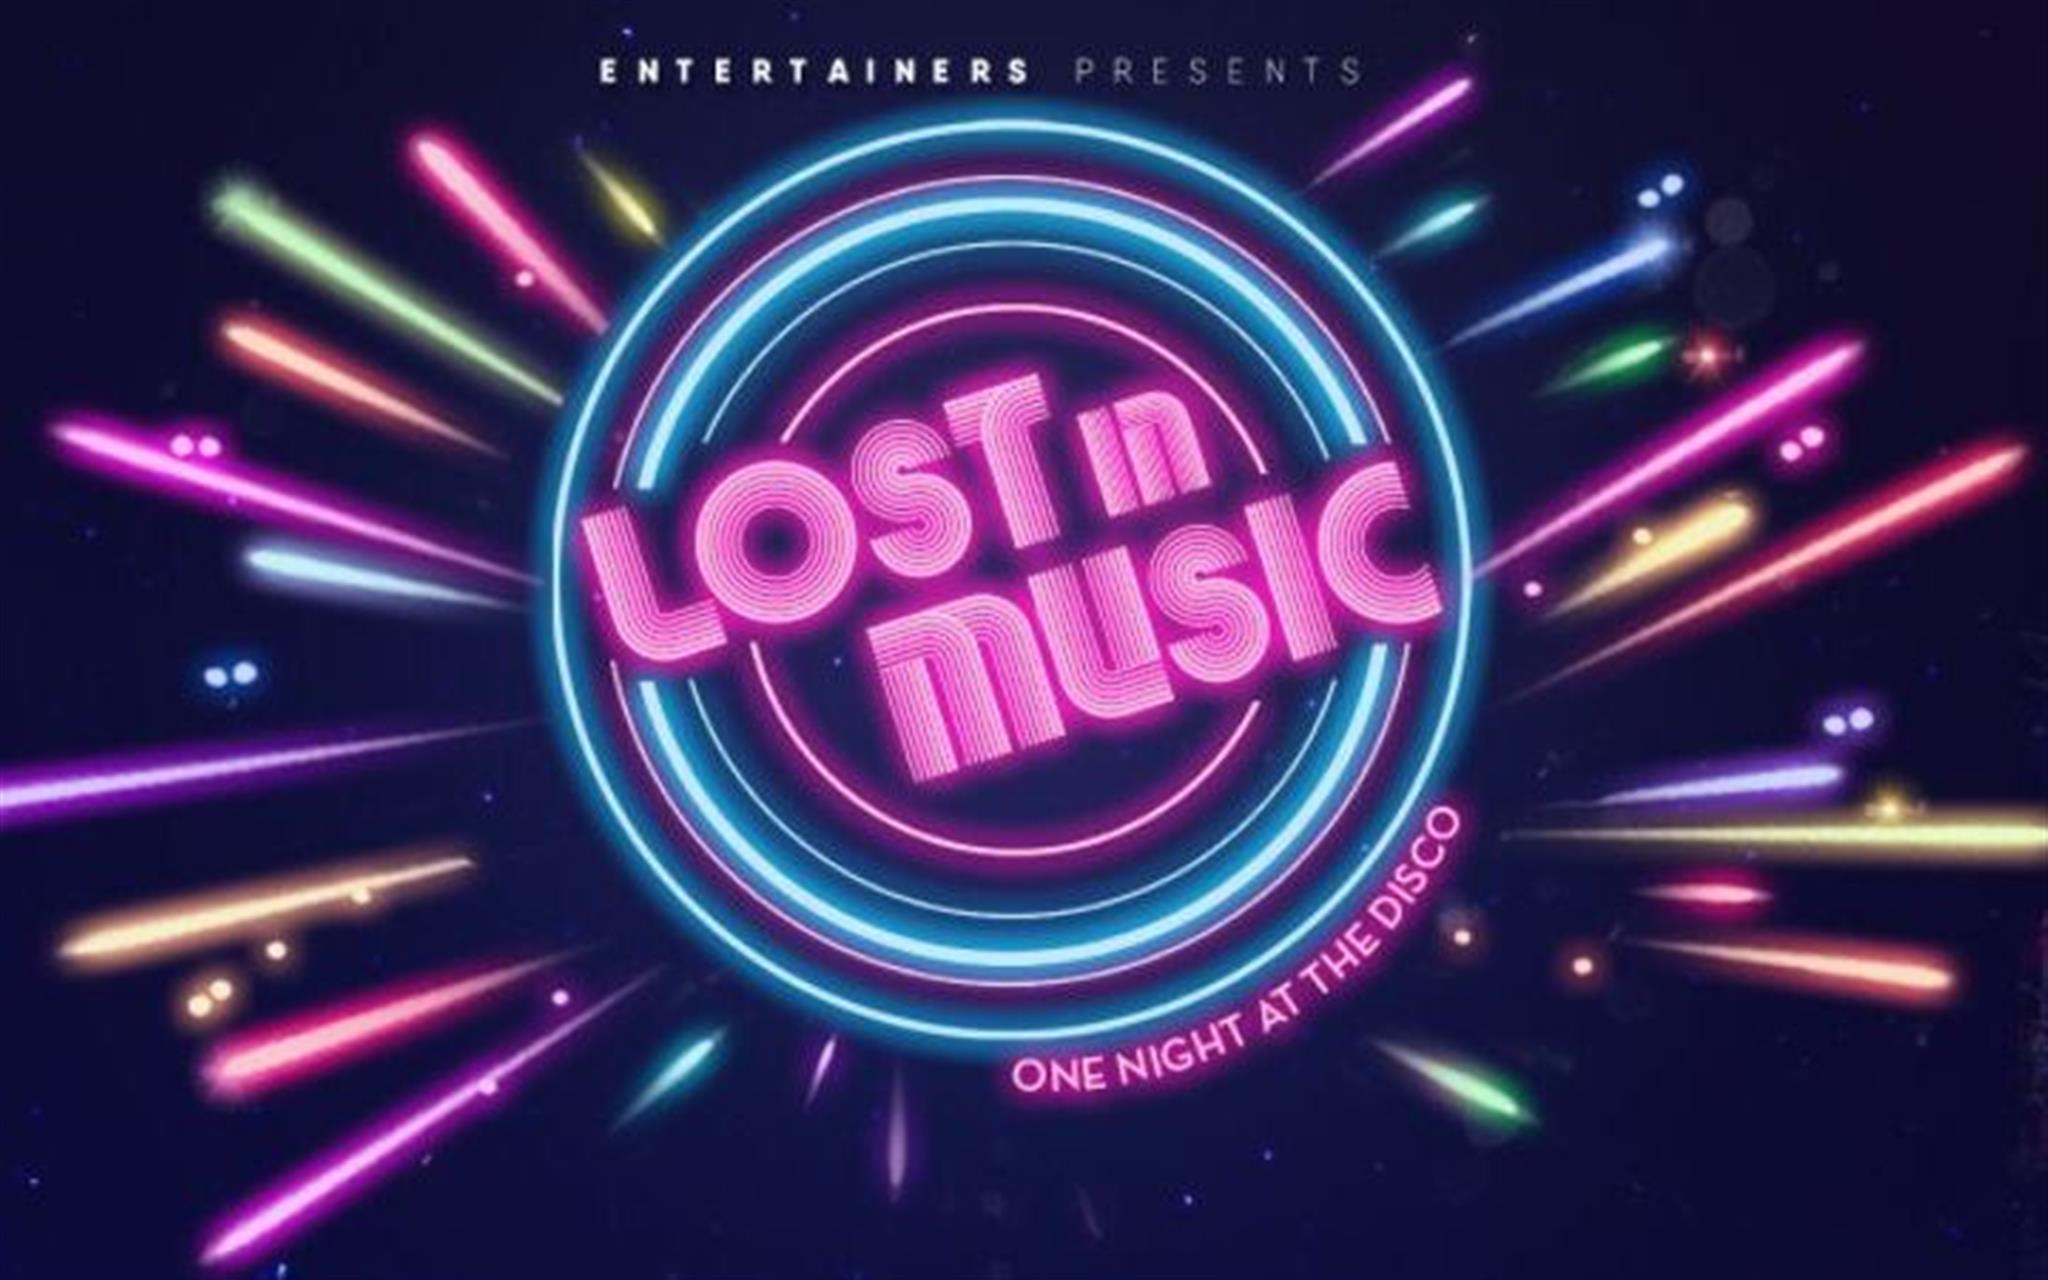 Lost in Music image